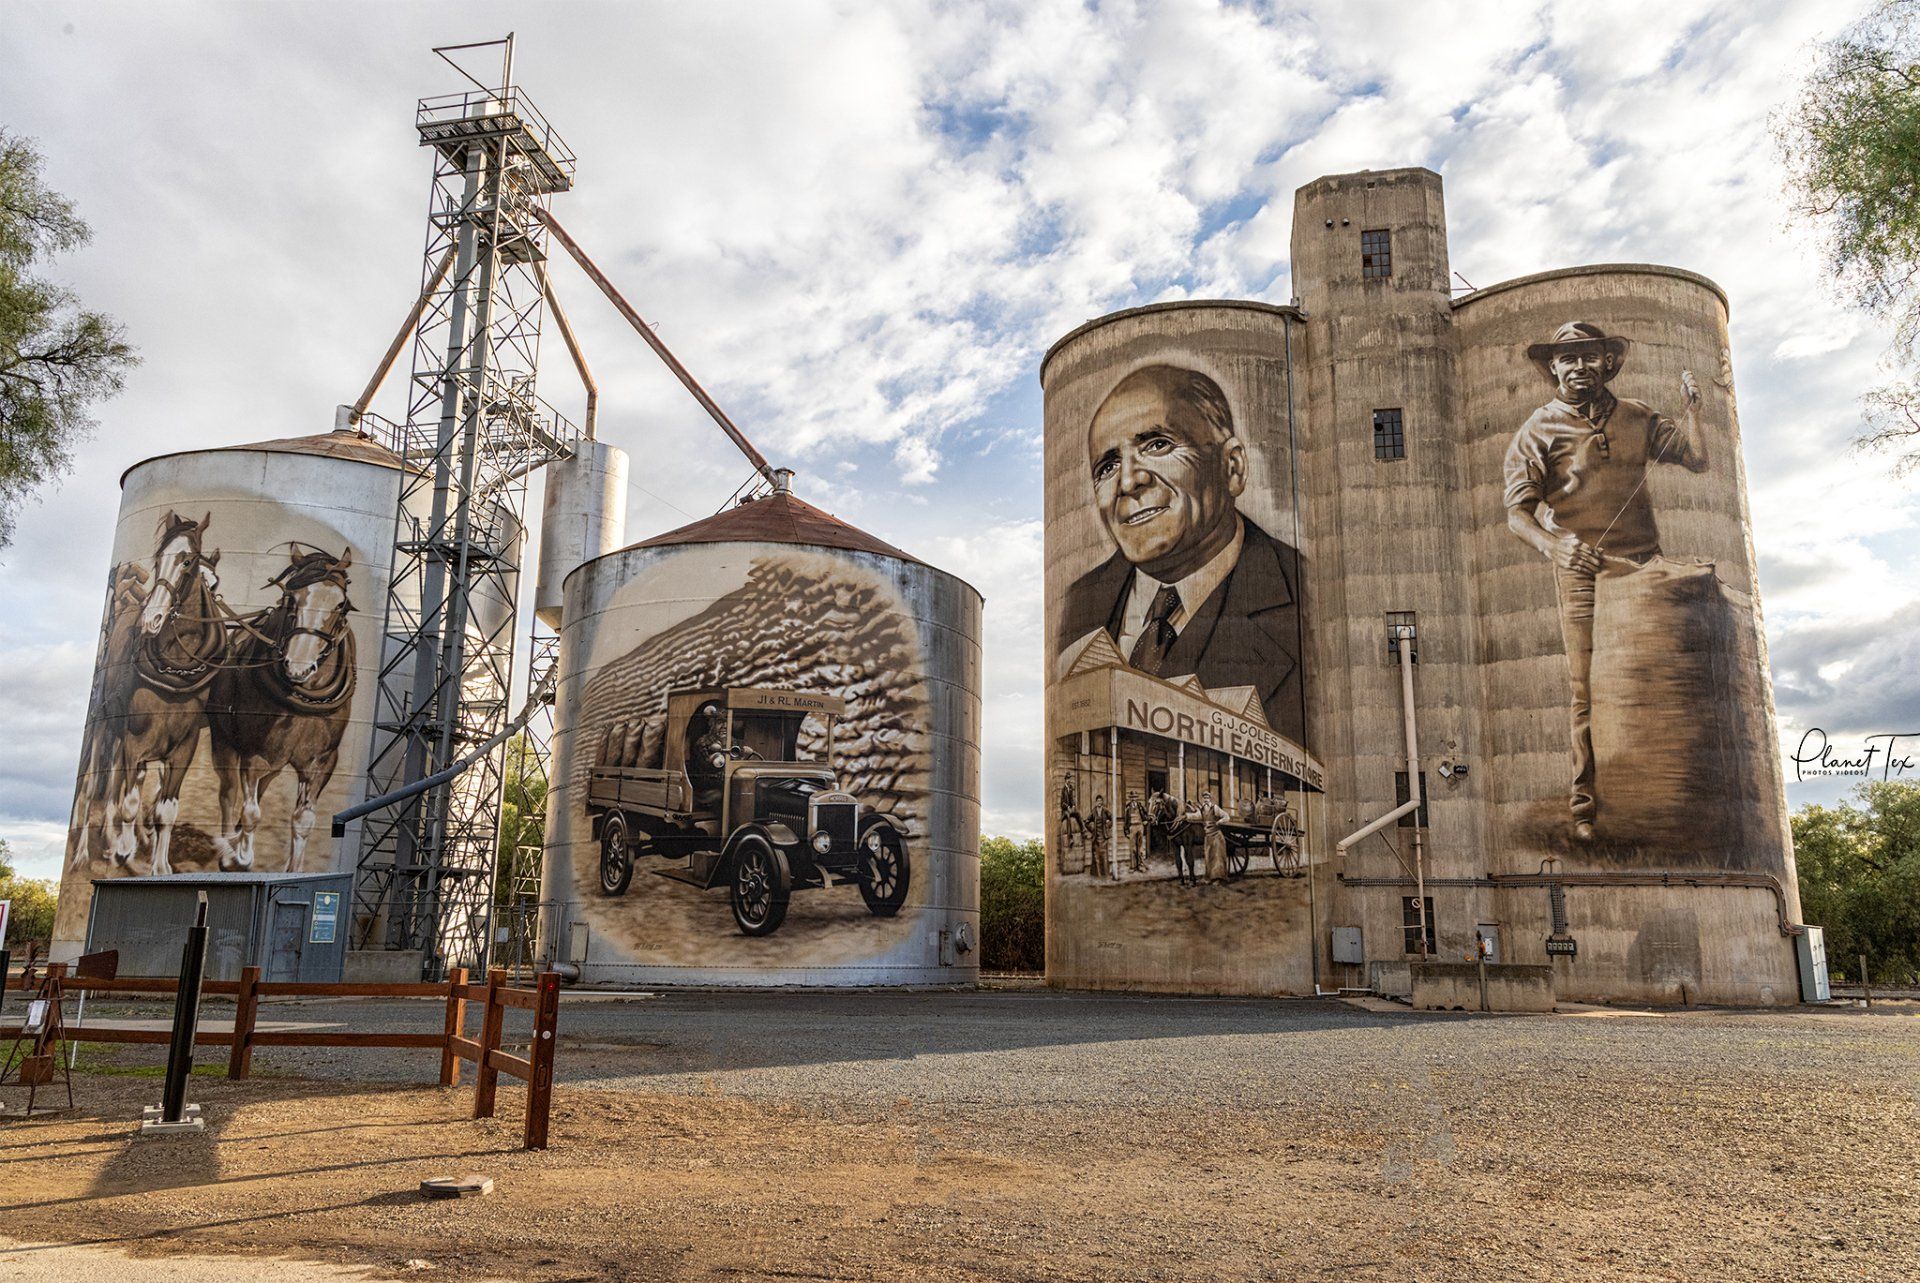 GrainCorp Silos at St James, Victoria by Tim Bowtell, Photo by Planet Tex